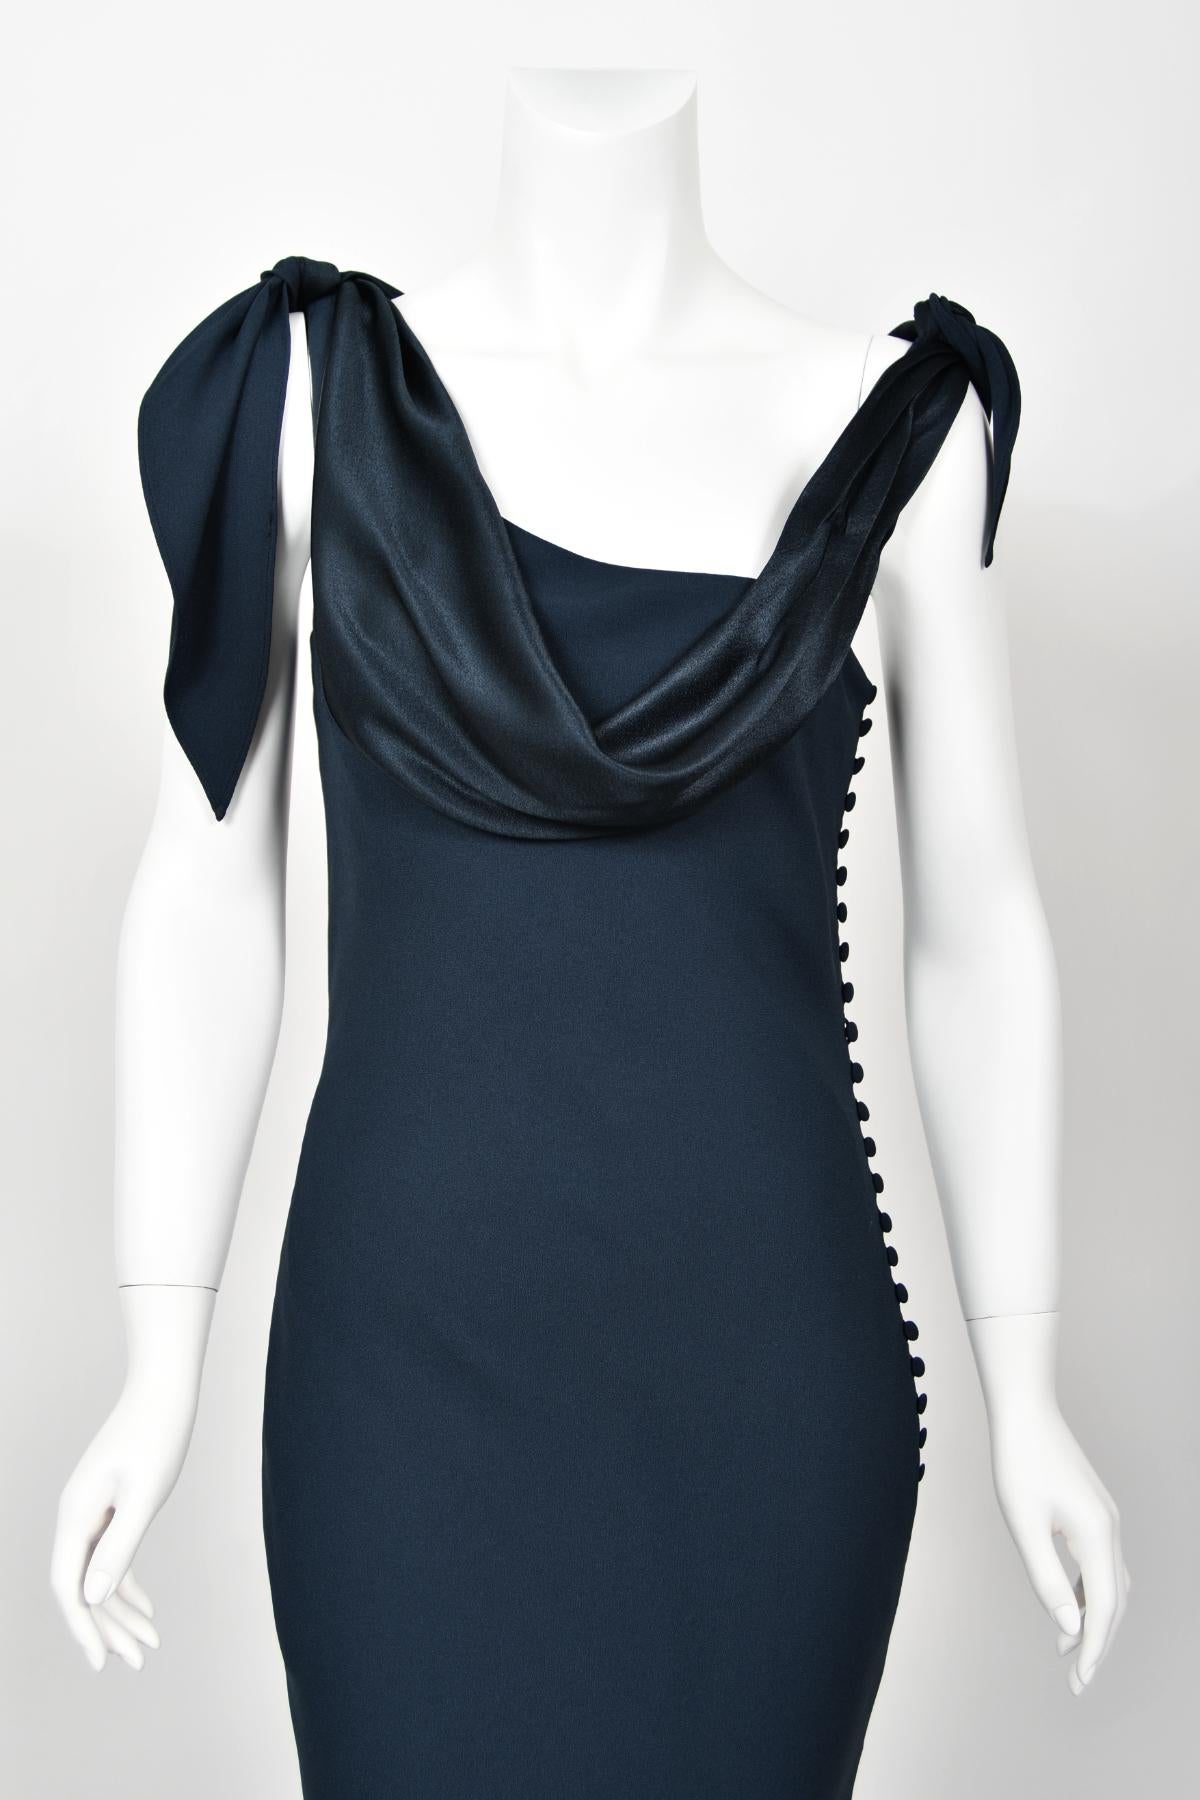 1998 Christian Dior by John Galliano Navy Blue Silk Draped Bias-Cut Evening Gown For Sale 3